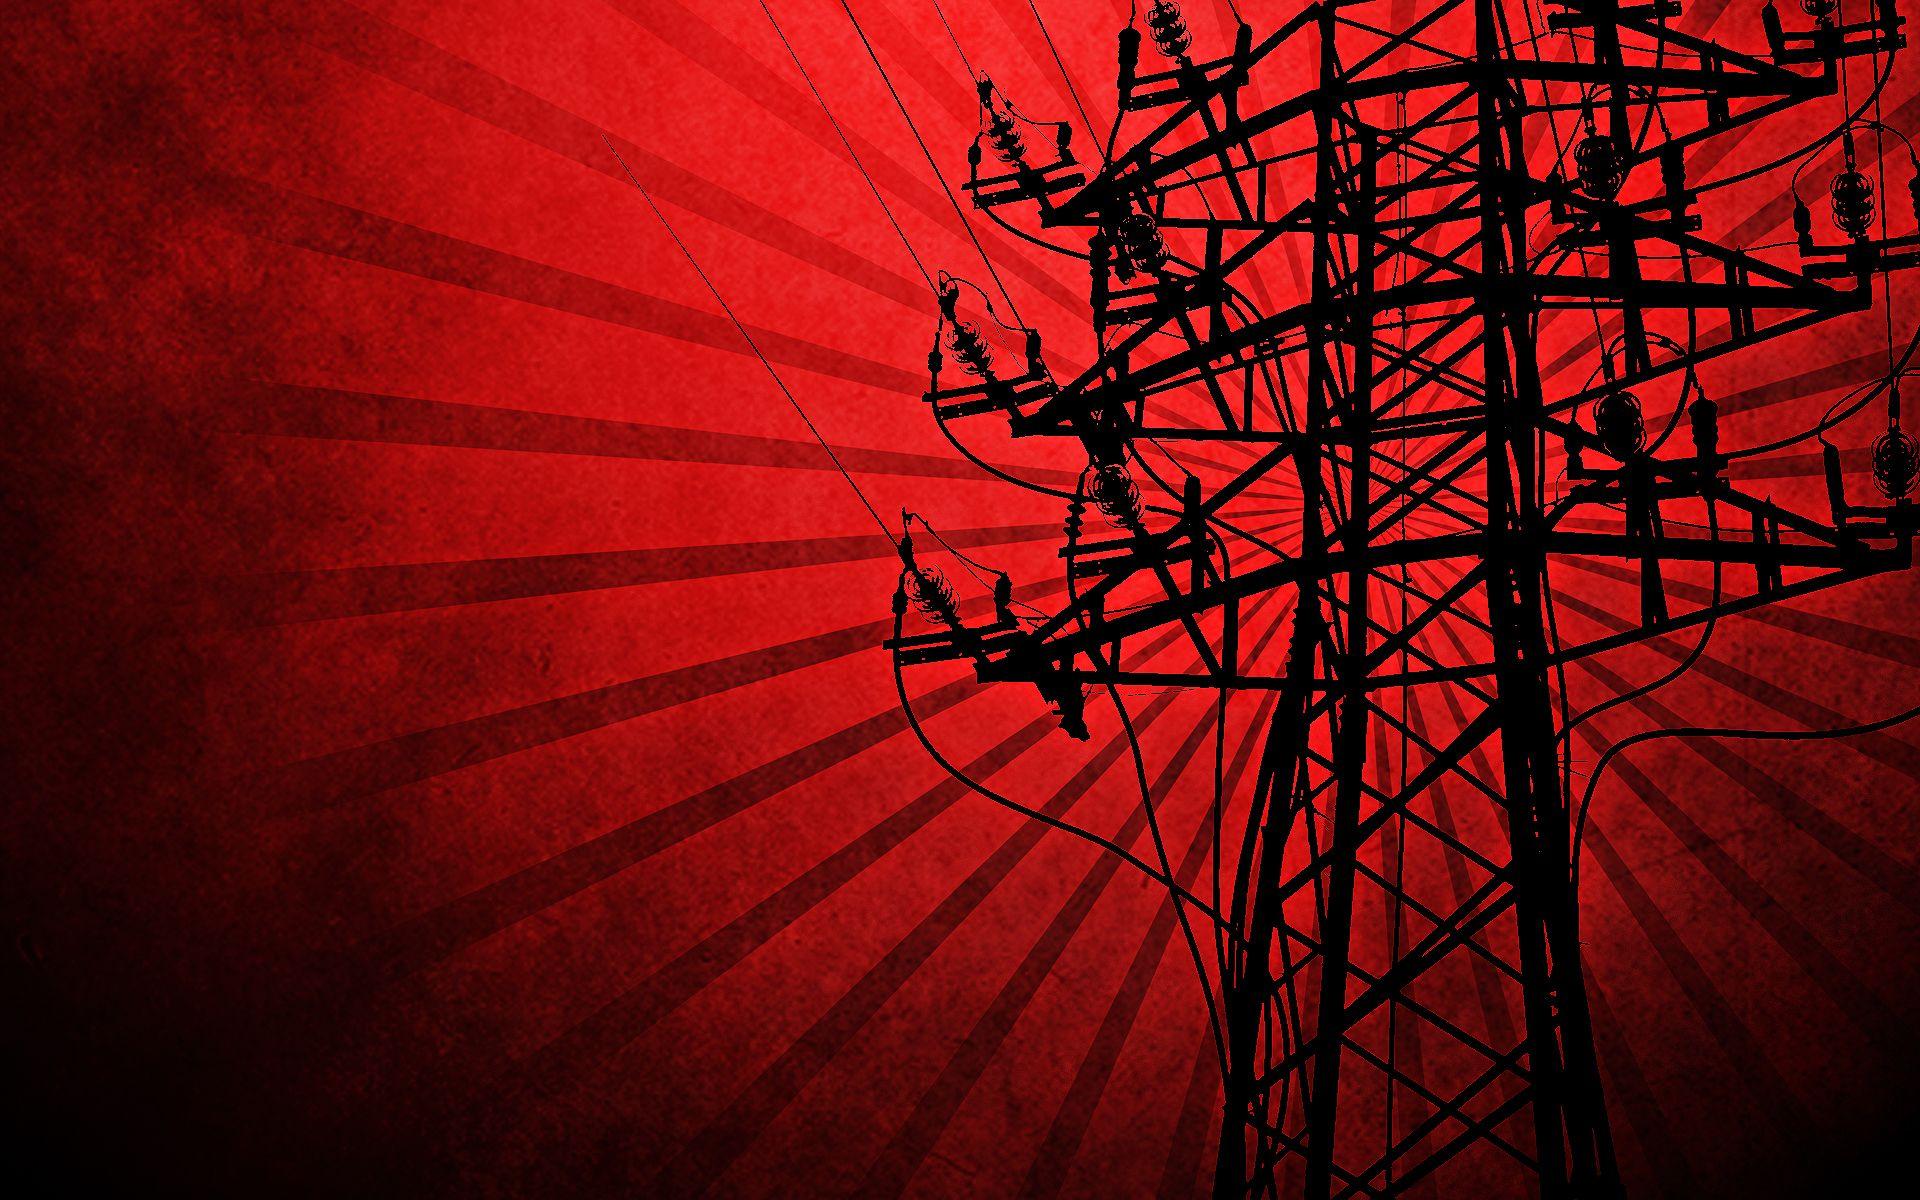 Electricity Wallpaper, Full HD 1080p, Best HD Electricity Pics